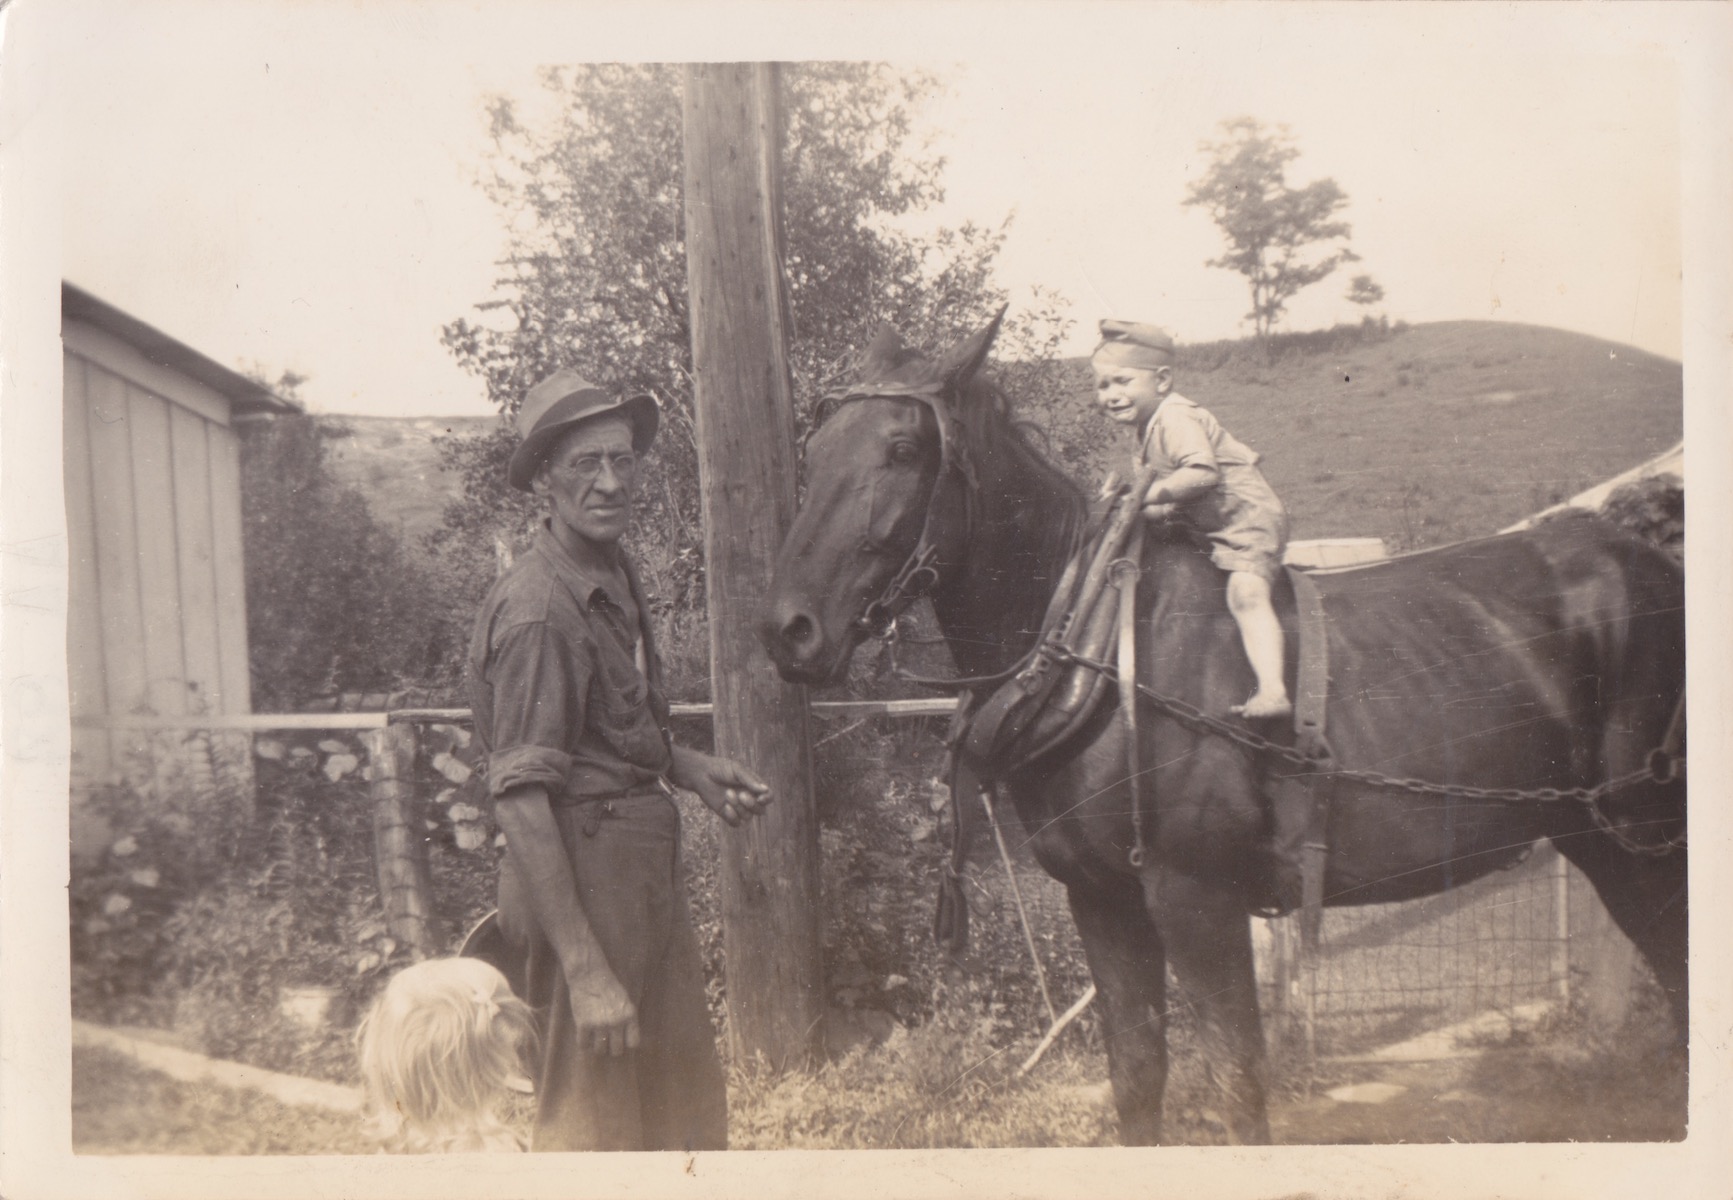 K.C. Potter (grandfather) and K.C. Potter on top of a horse. 